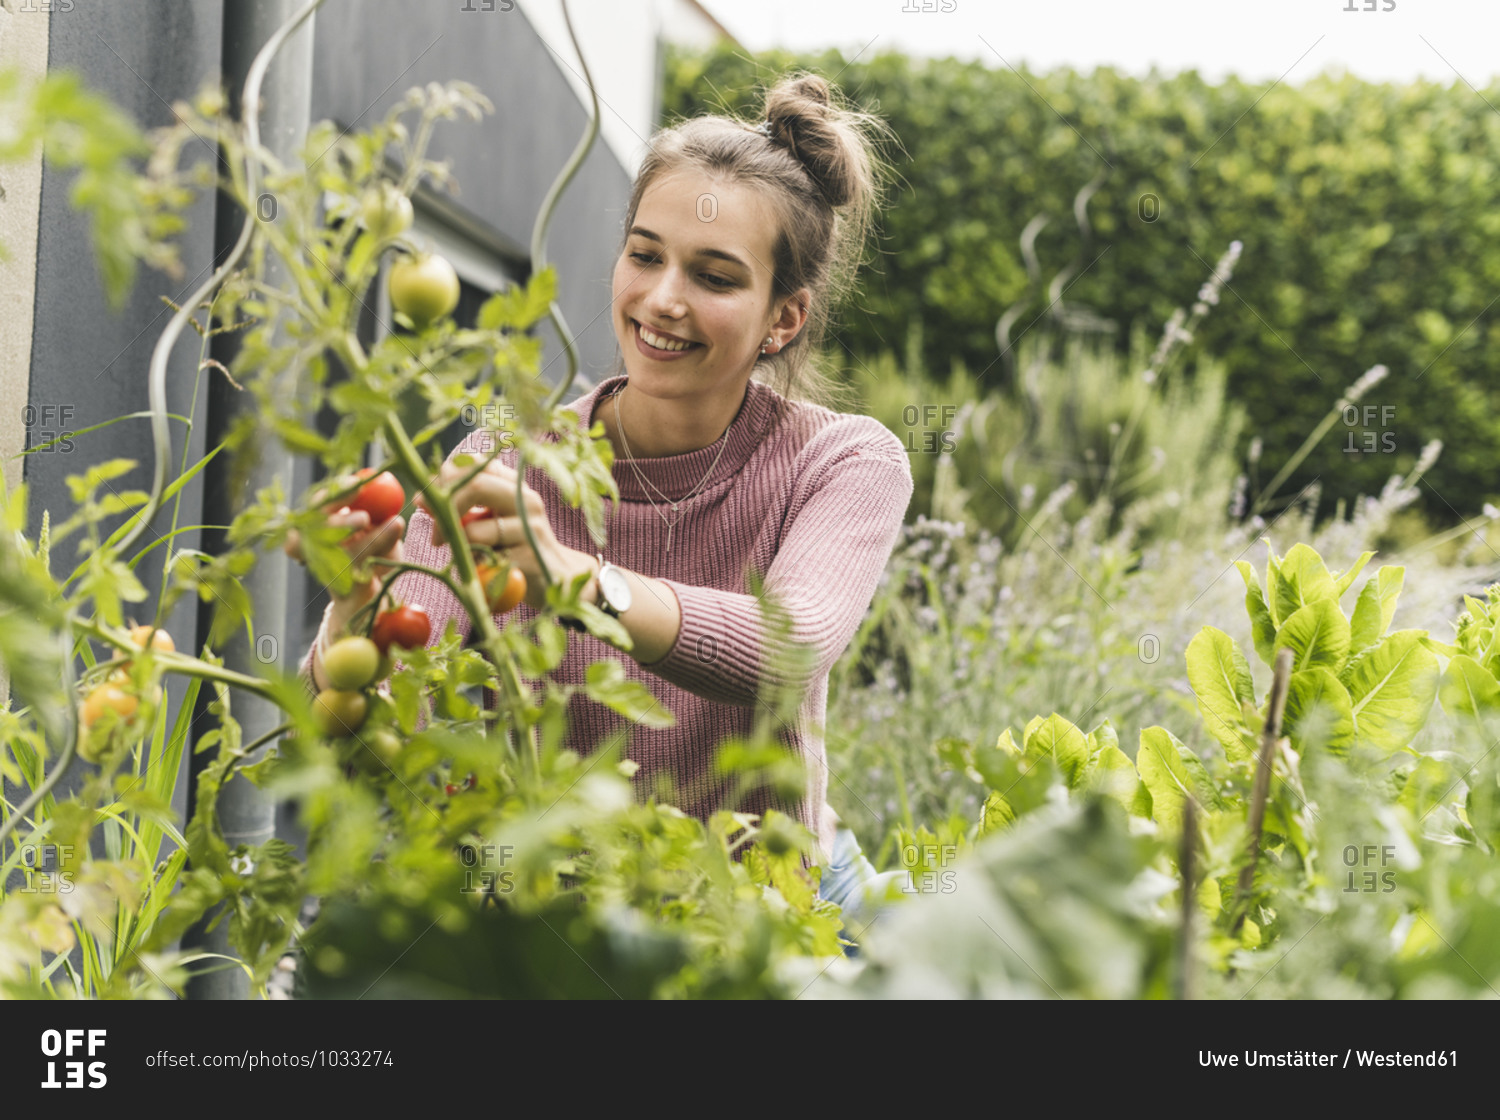 Smiling woman picking cherry tomatoes in community garden